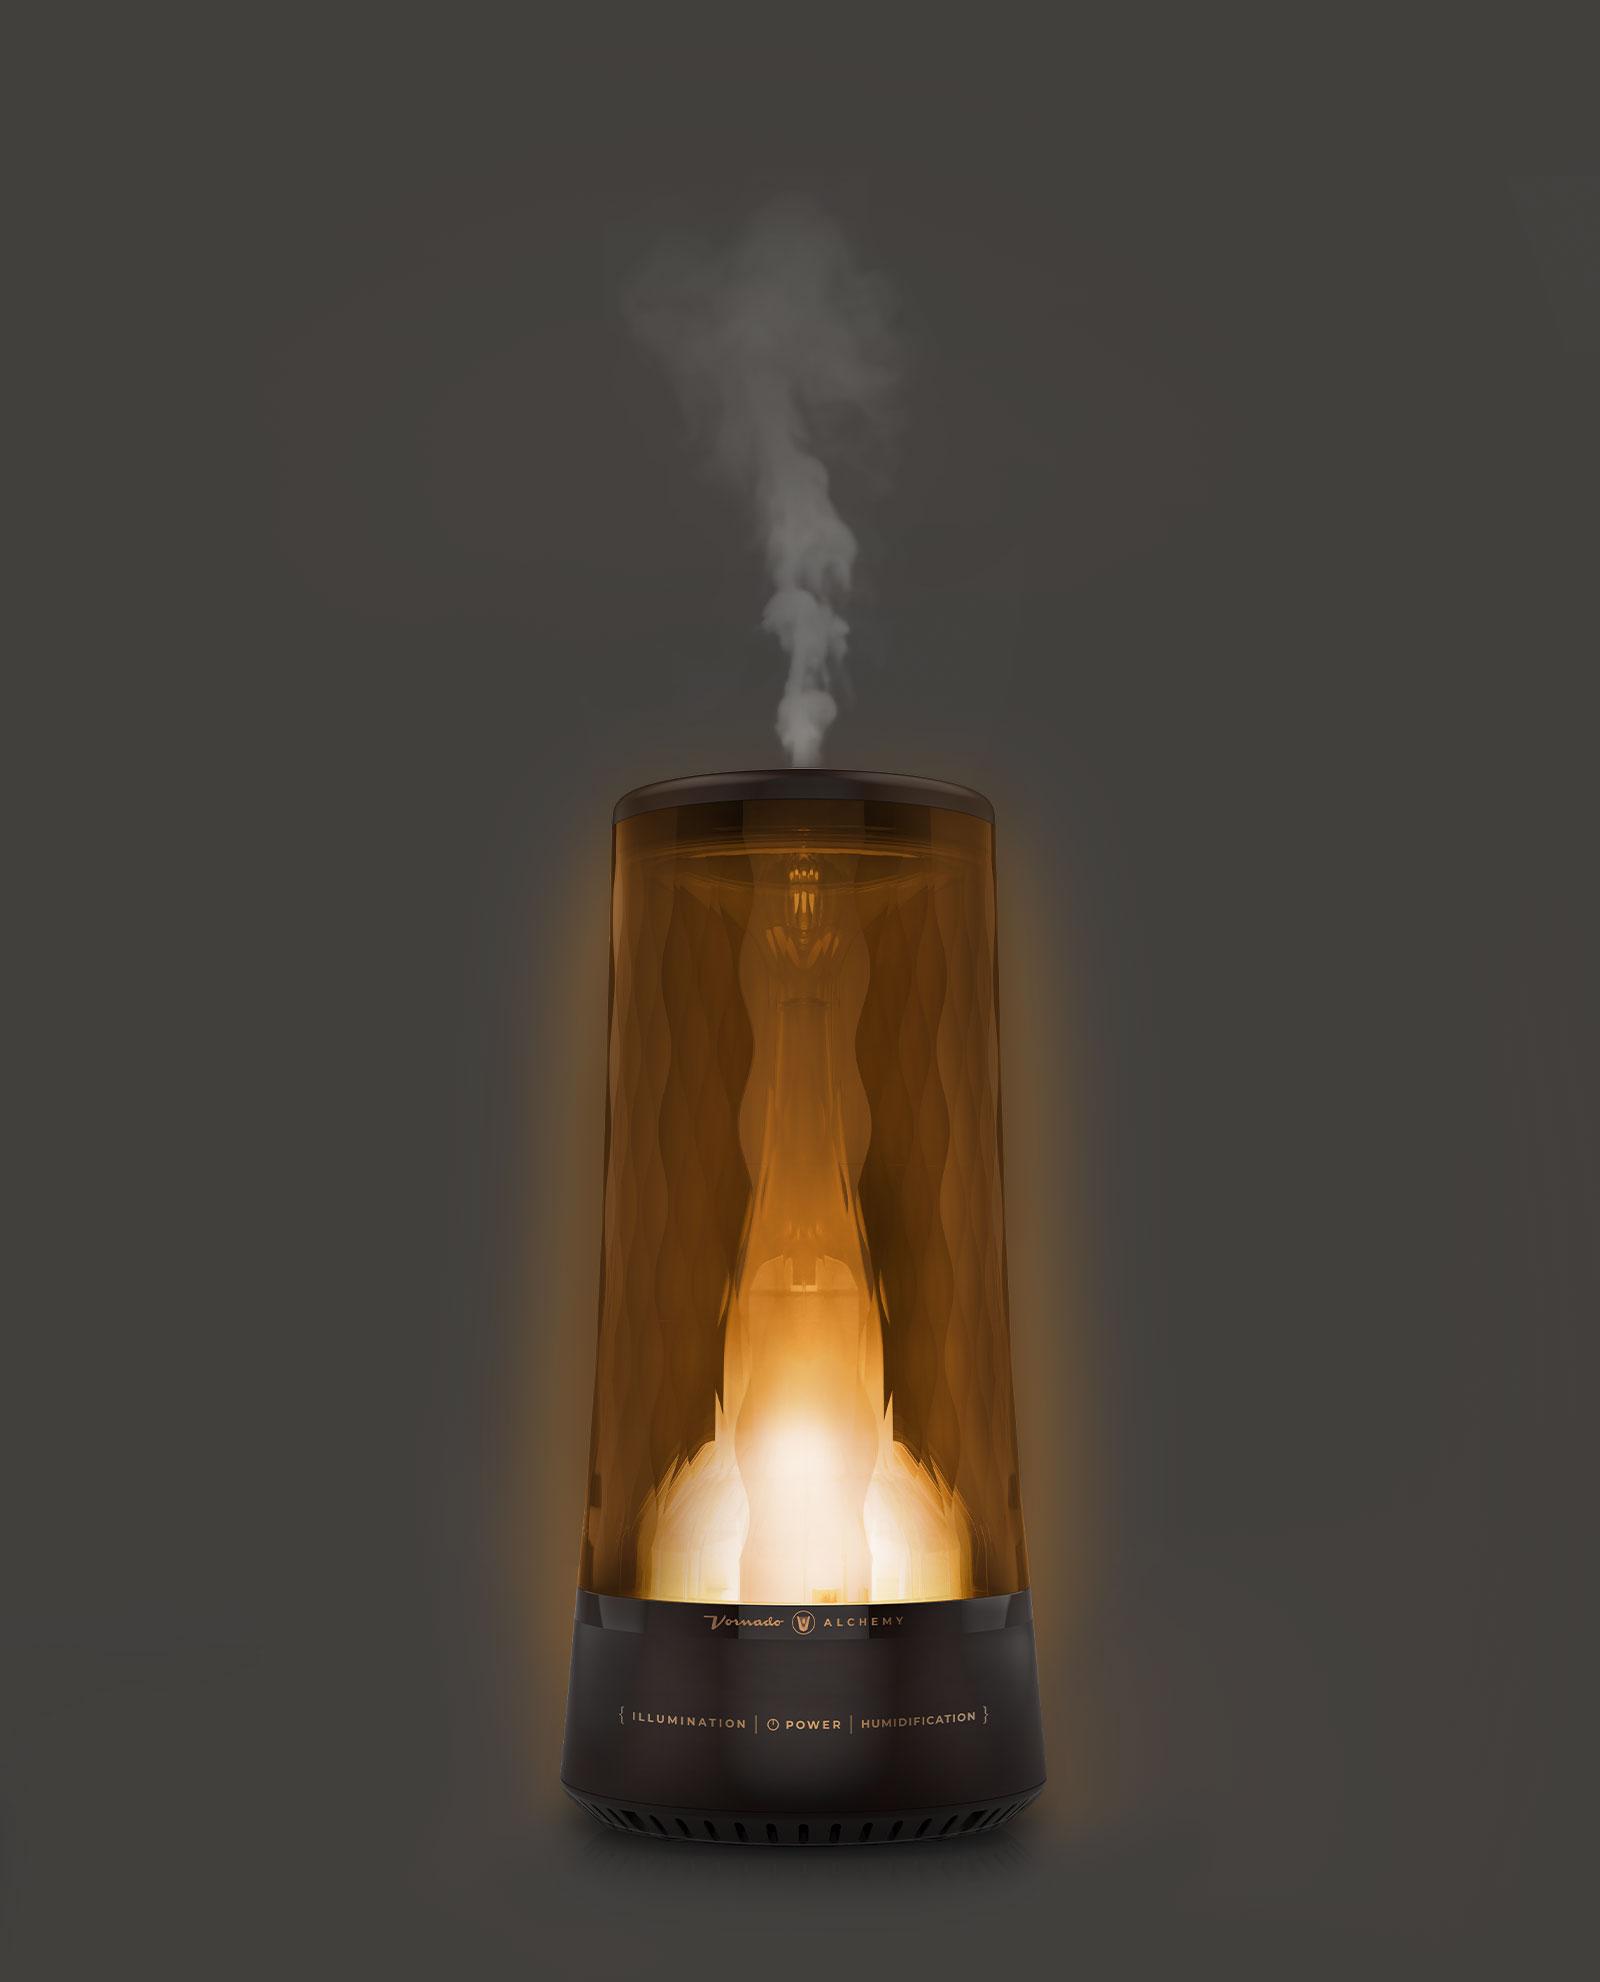 Smoke from Ultrasonic Aroma Diffuser and colorful light on black background.  Color Steam moving in d, Stock Footage